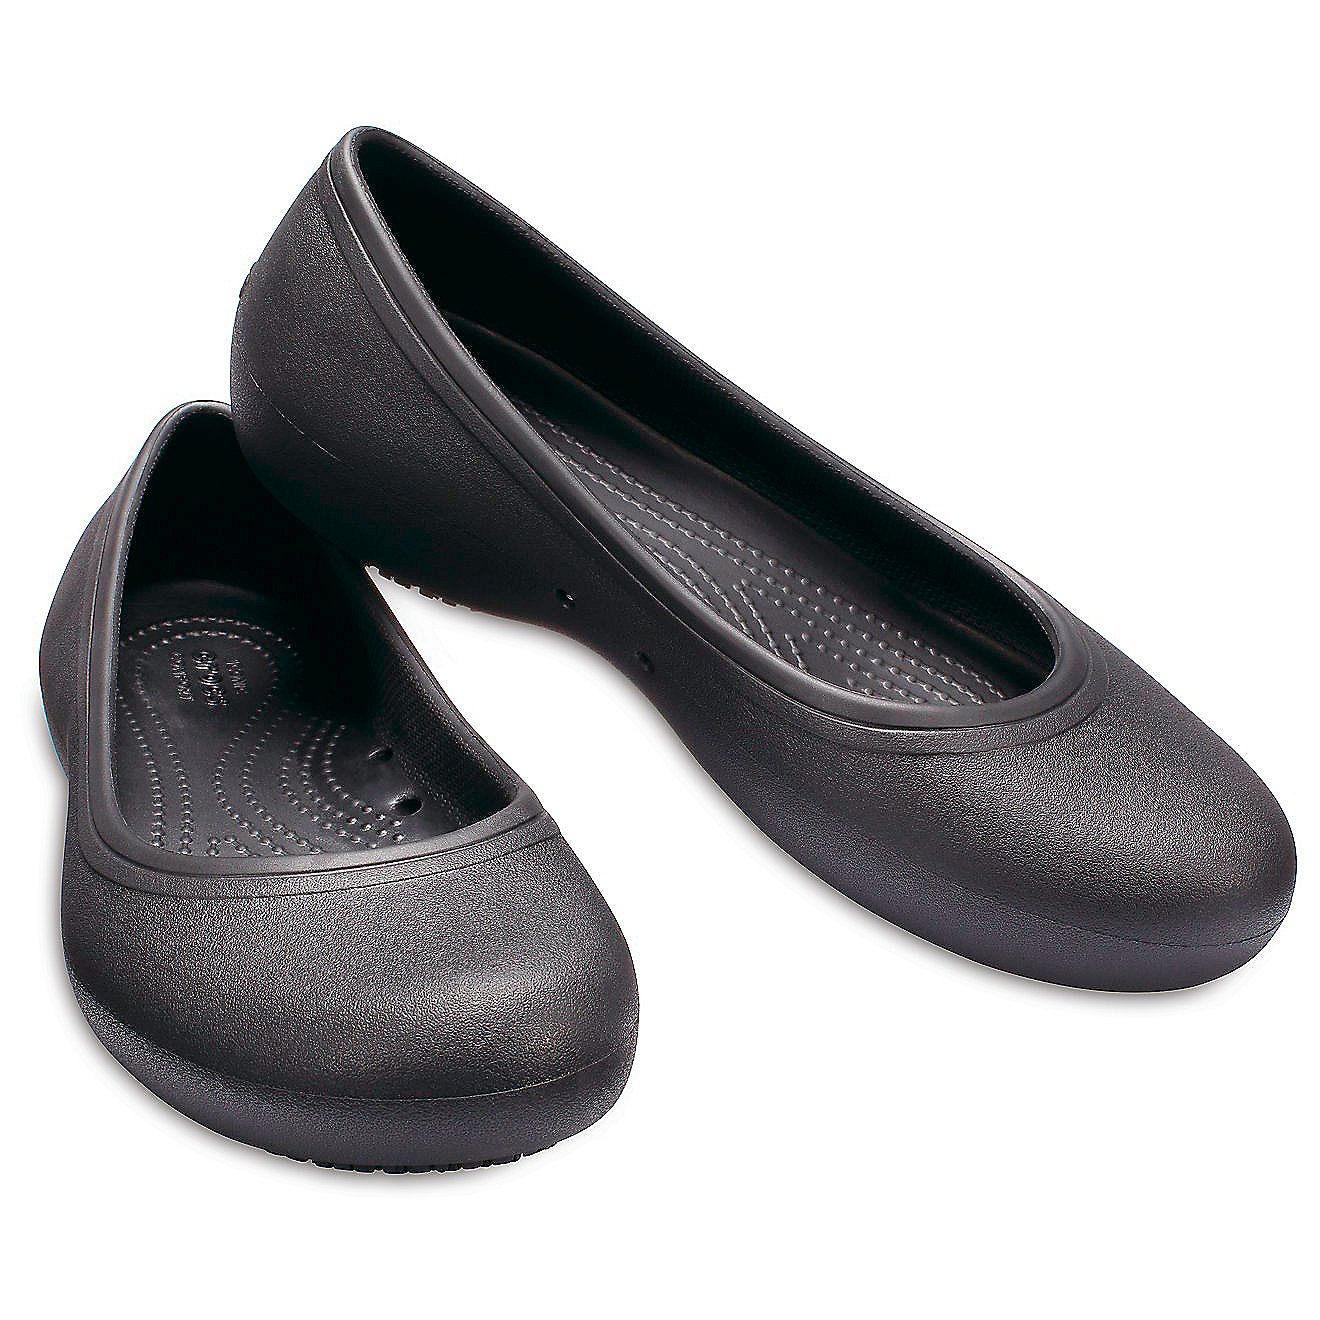 Crocs Women's At Work Flat Shoes | Free Shipping at Academy